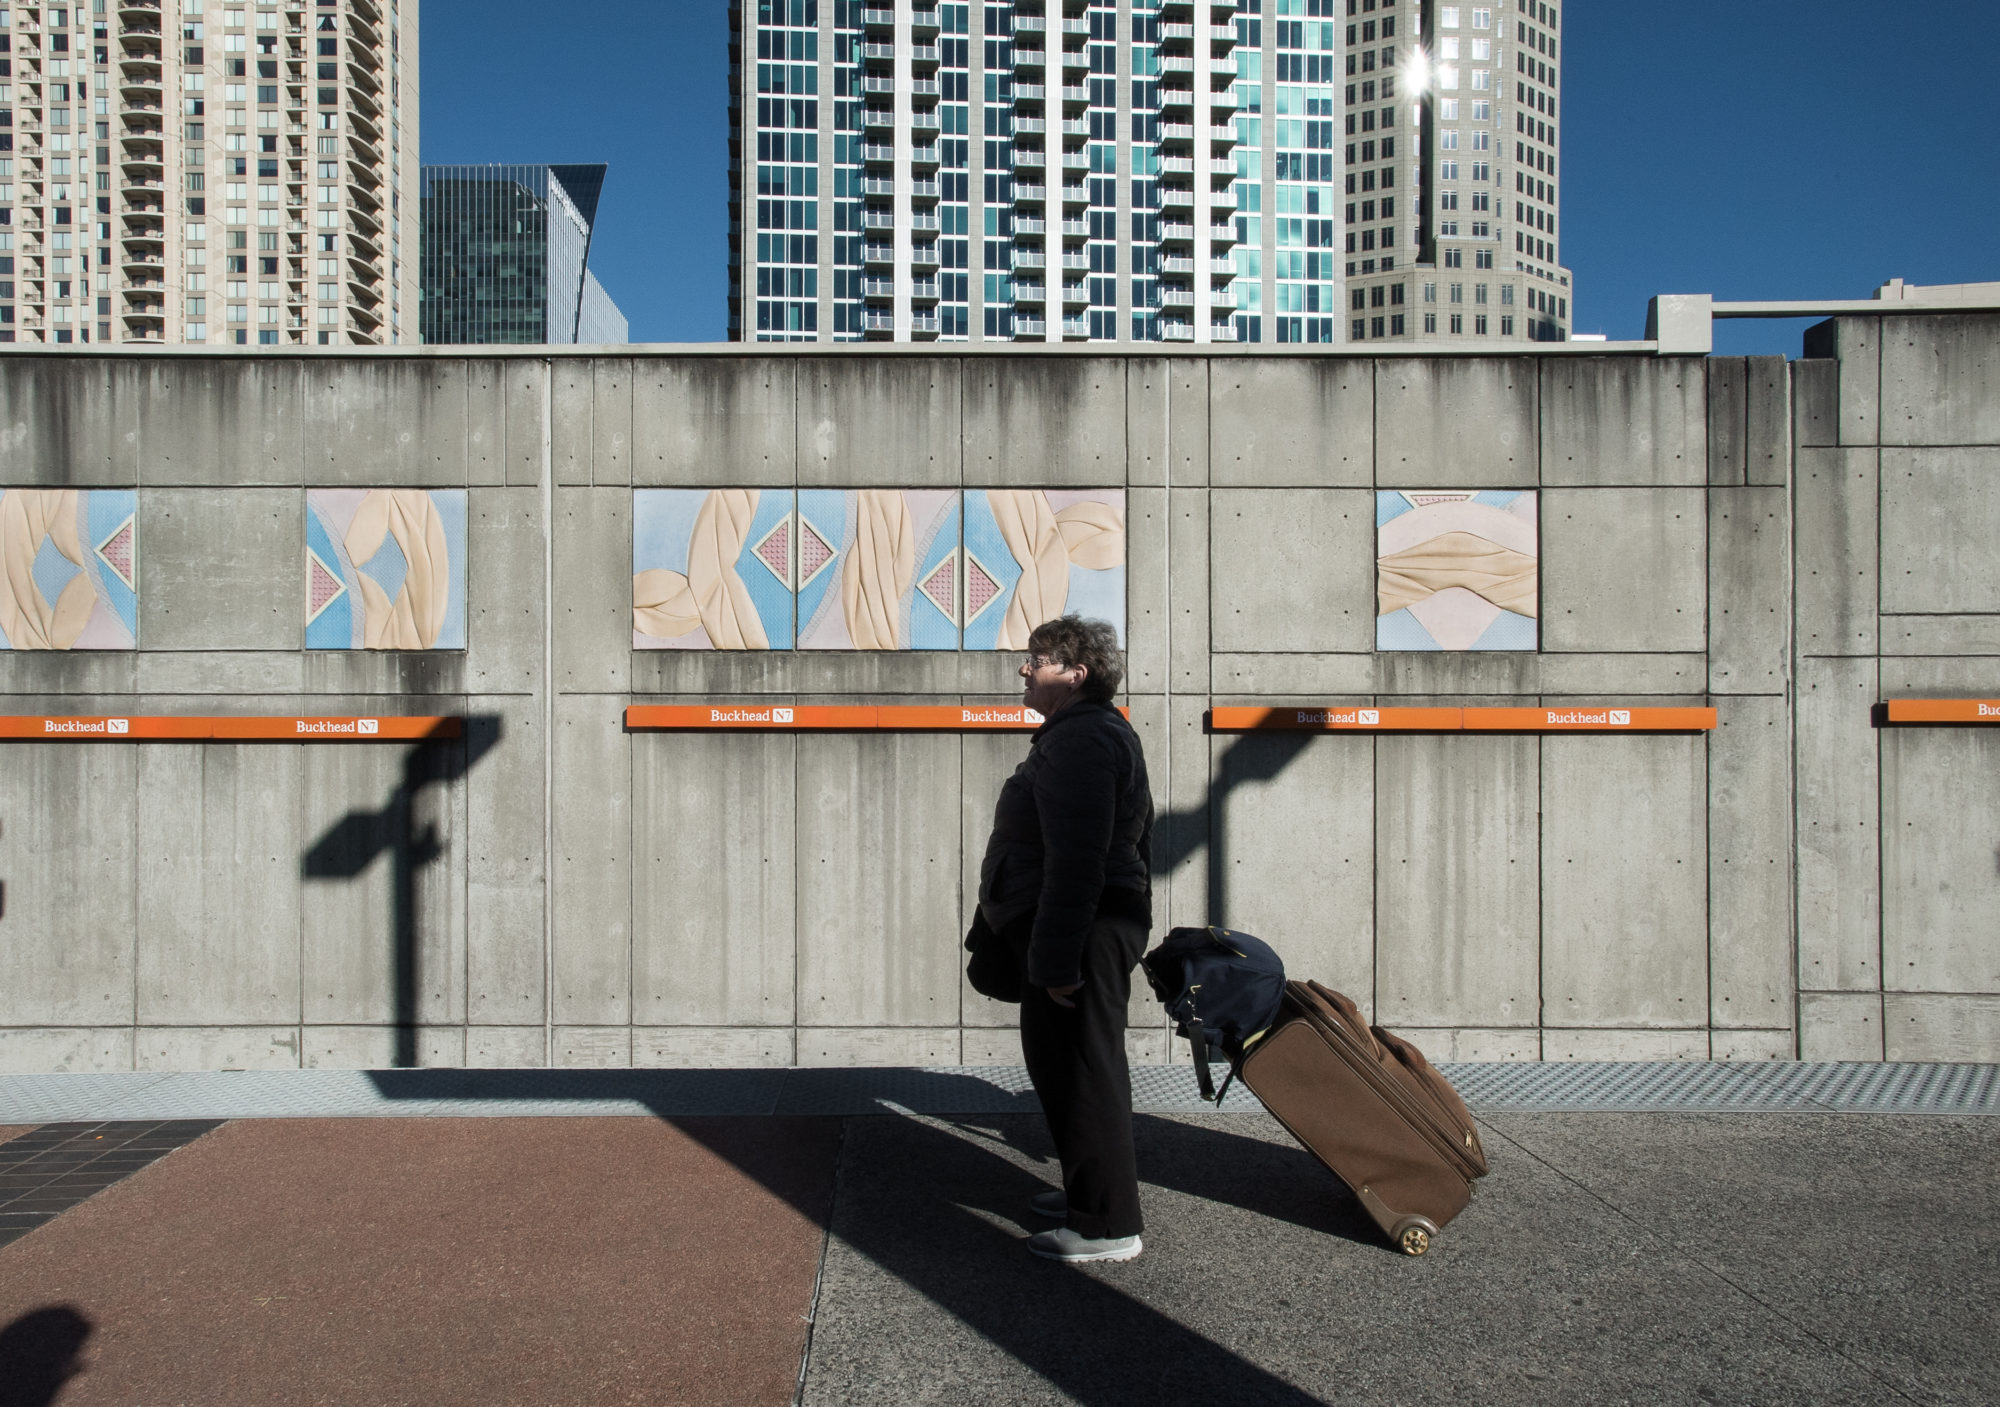 A person stands and holds luggage at a train station outside with apartment buildings in the back